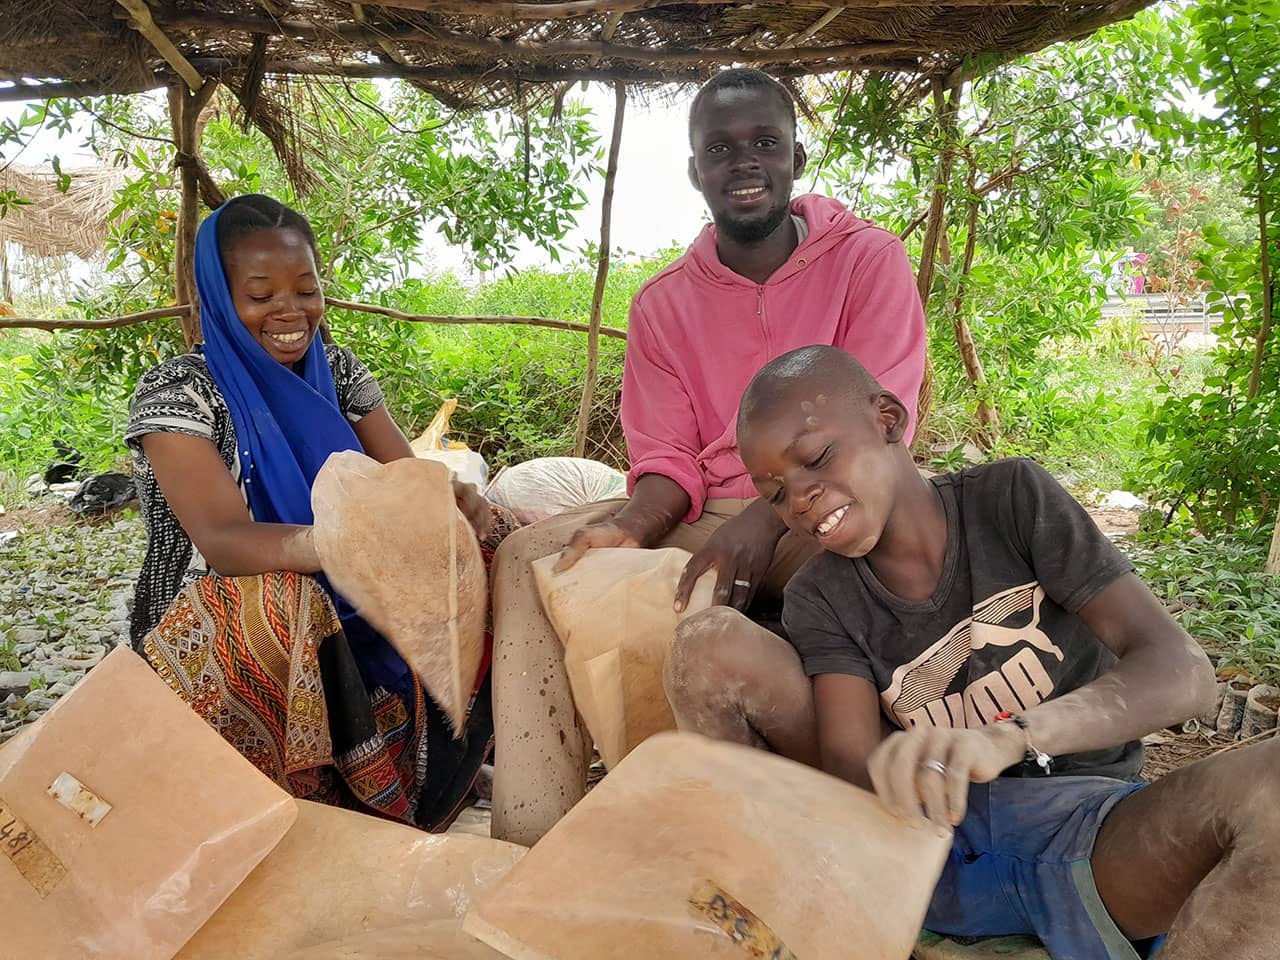 Karim Yalcouye (age 24) and his family sit amid his thriving tree nursery in the Ségou region of Mali.